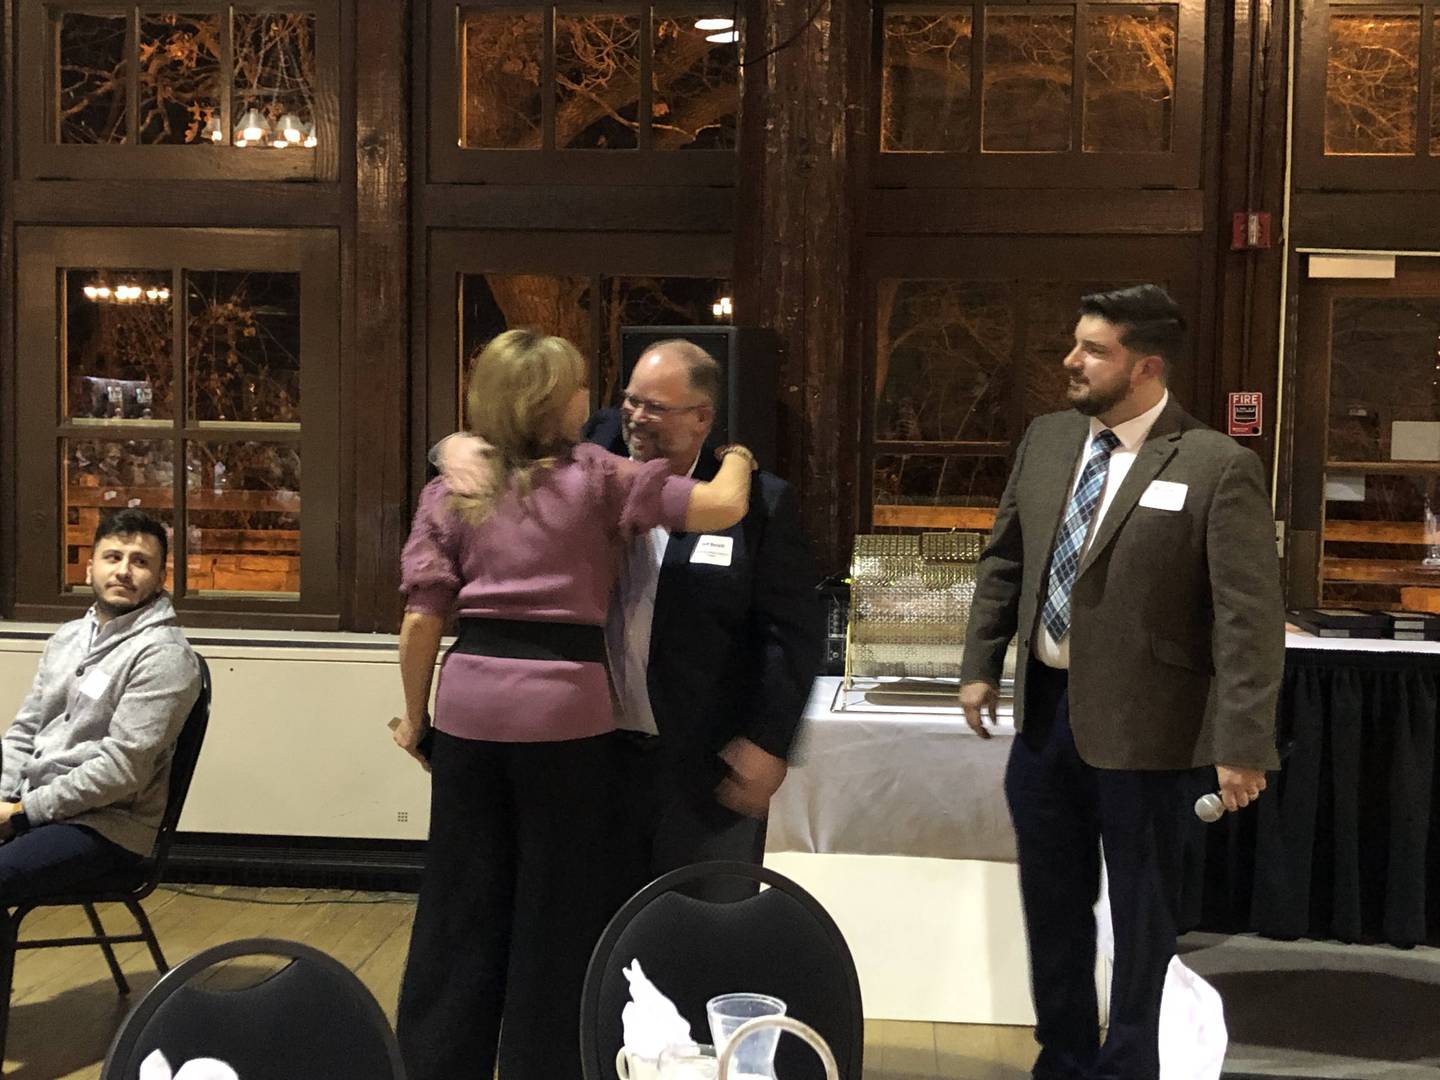 IVAC representatives give Dawn Farneti the volunteer of the year award for her service at the IVAC chamber dinner at Starved Rock Lodge on Thursday, Dec 8, 2022.